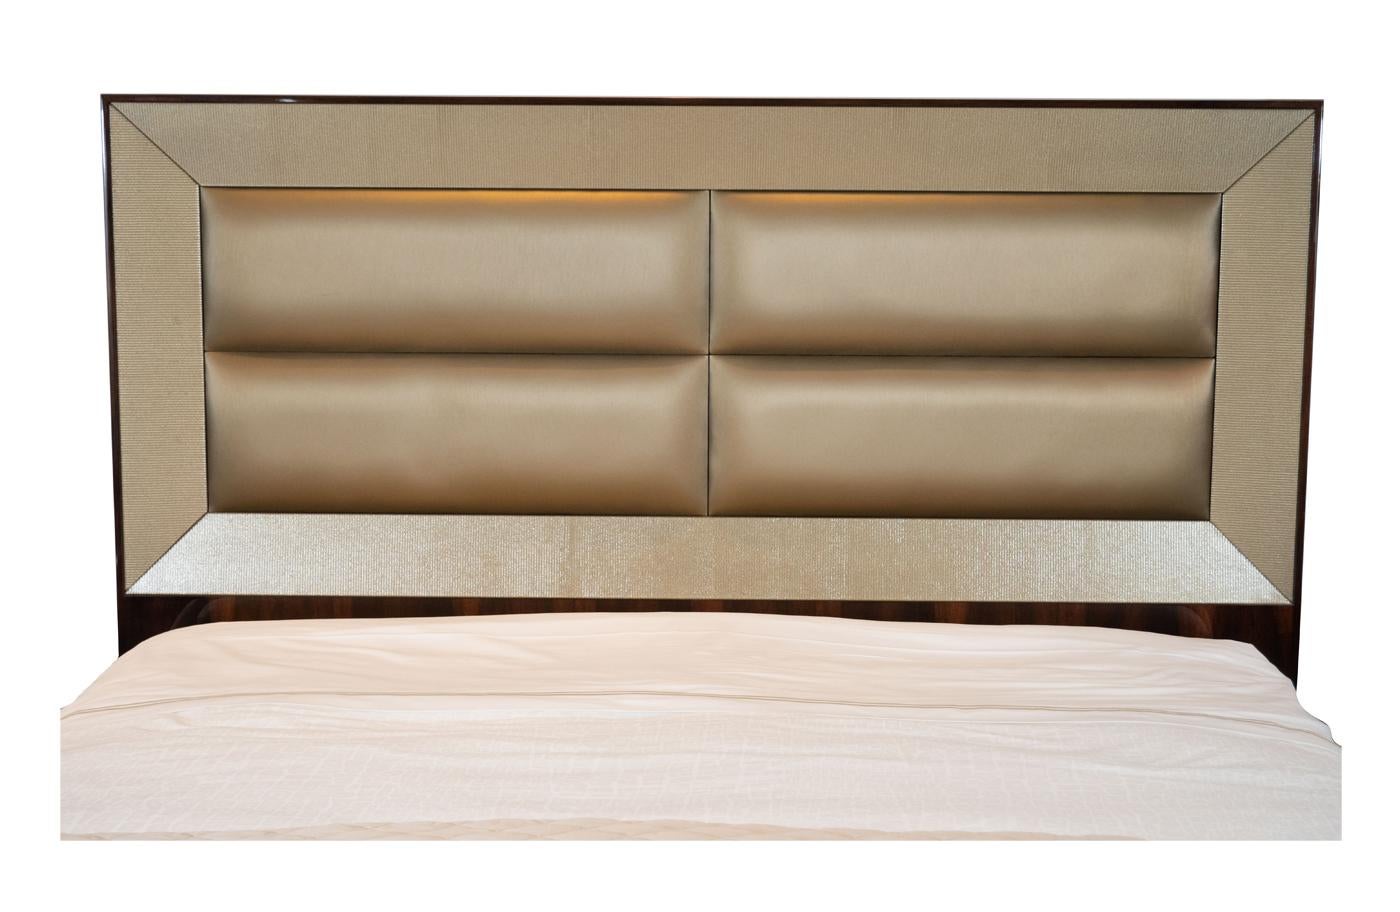 American Marquee Bed For Sale